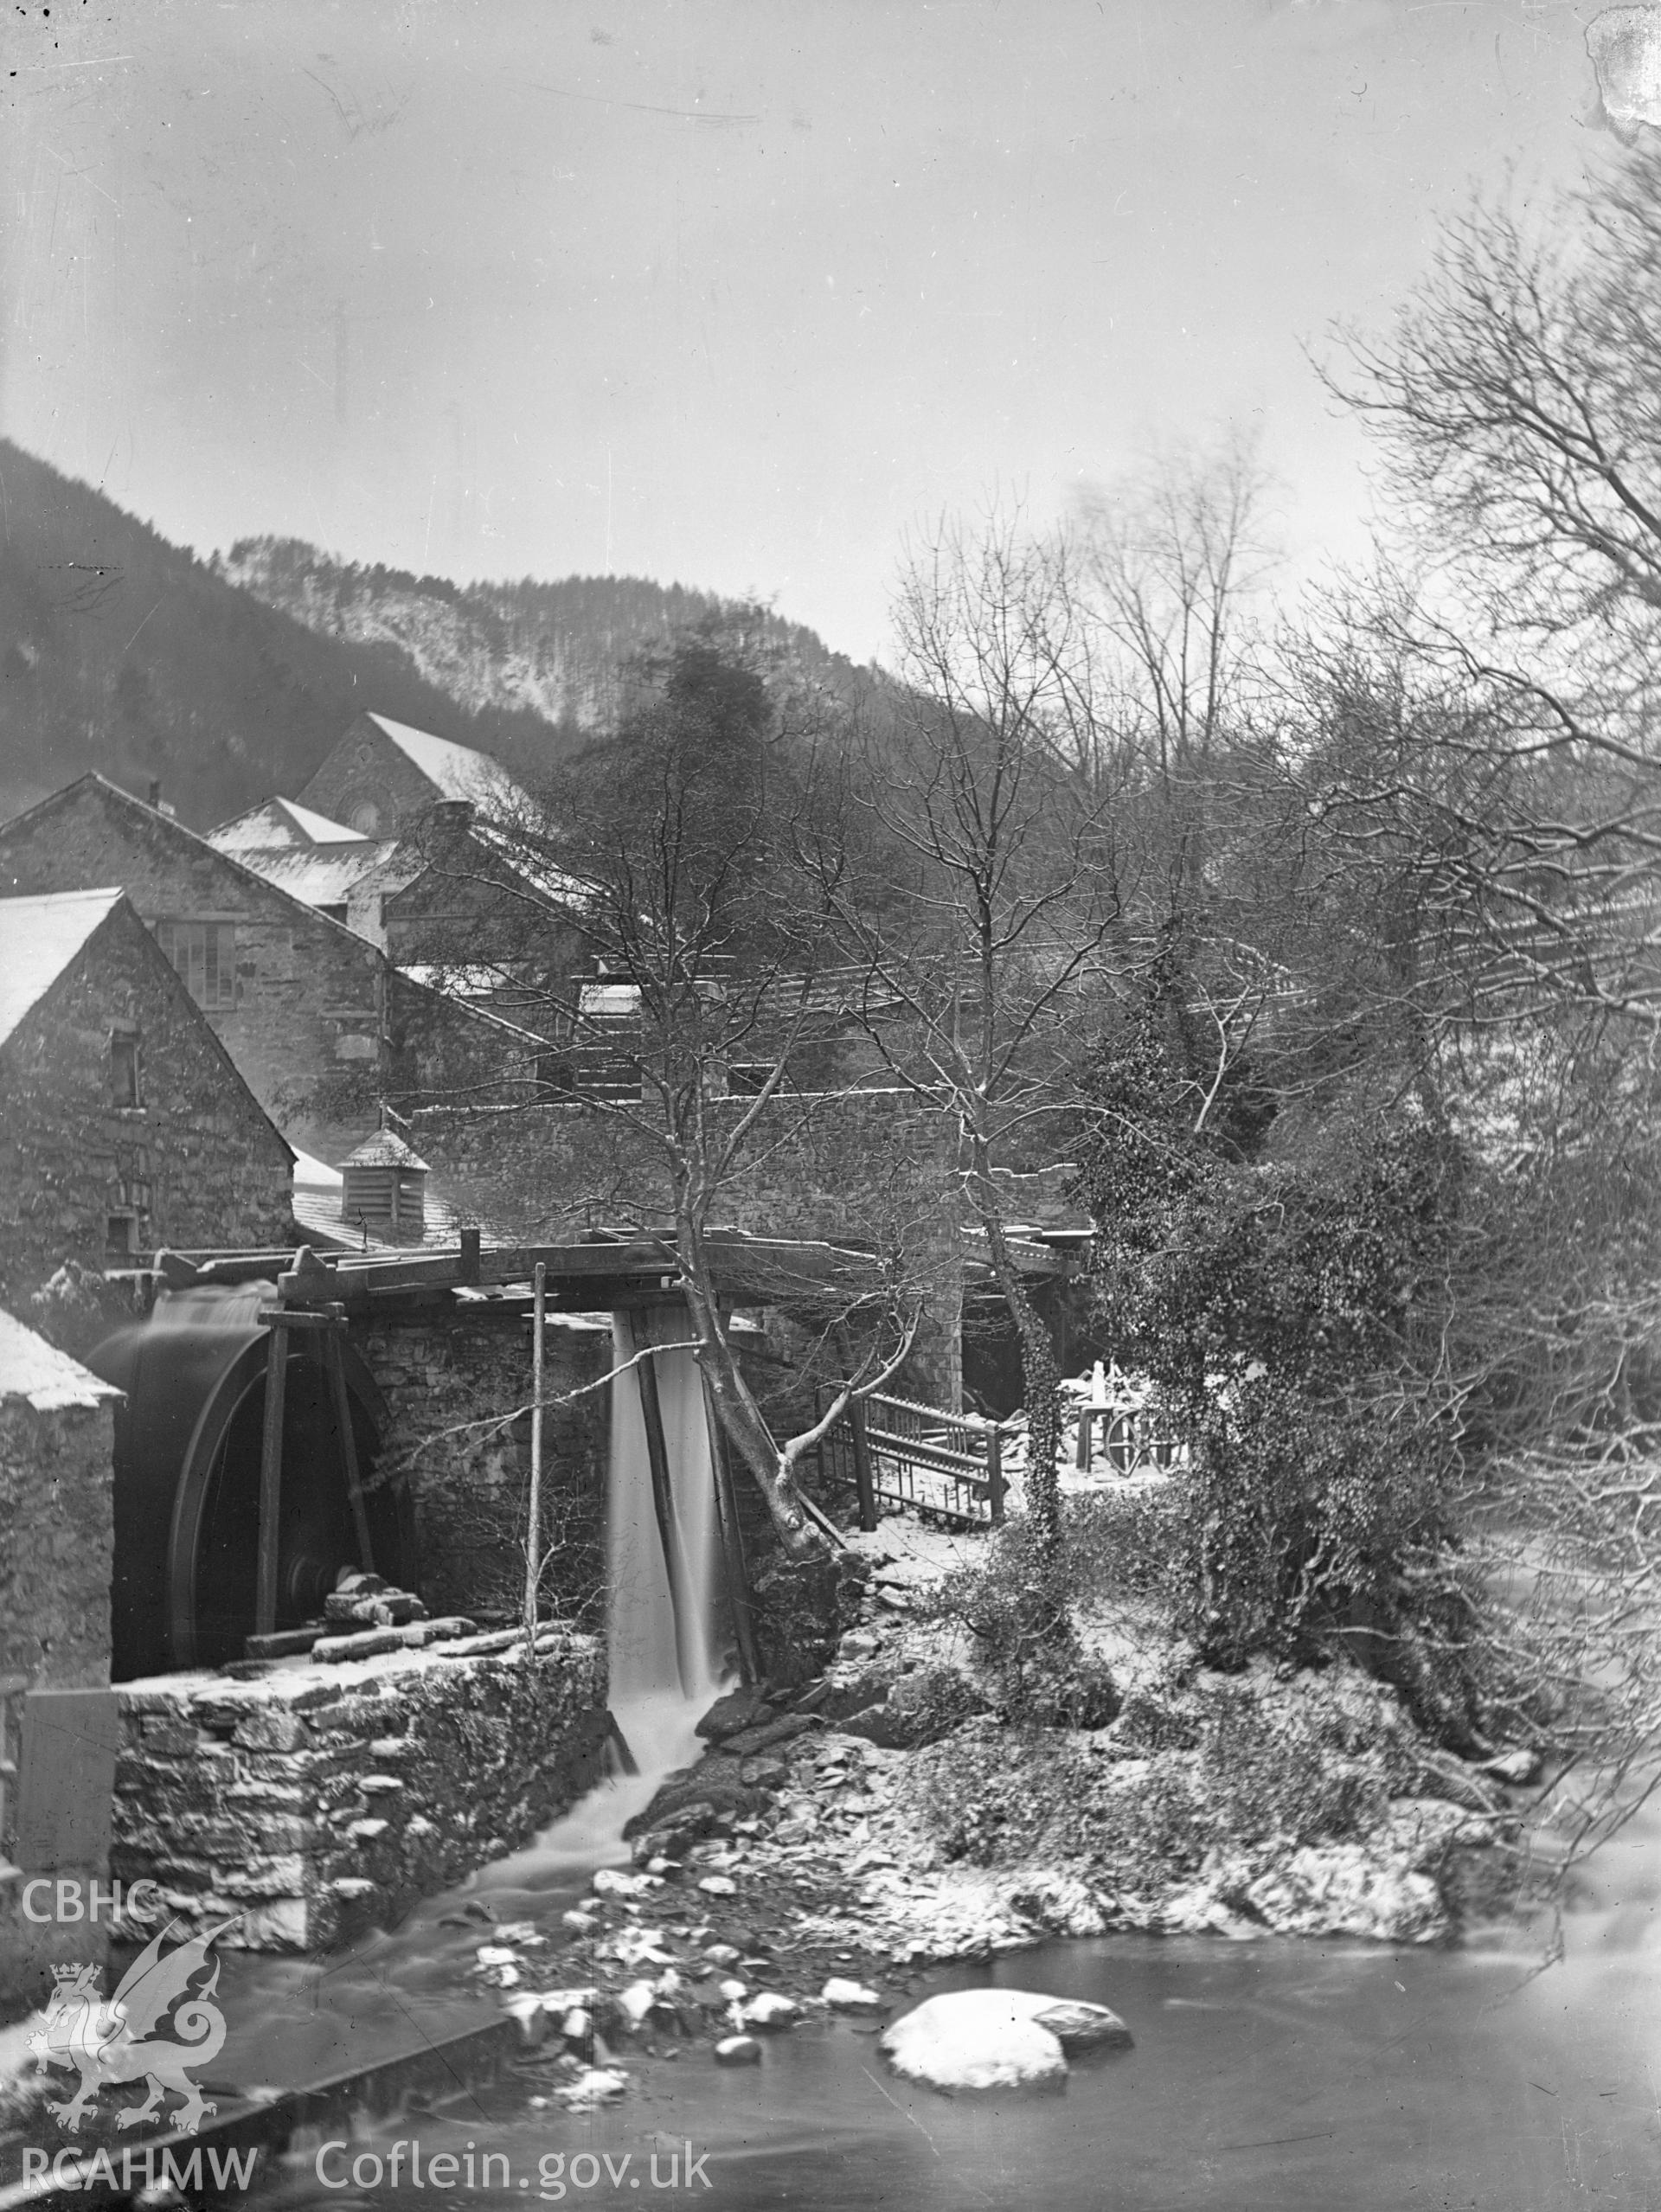 Digital copy of a glass plate showing view of watermill in the Fairy Glen at Trefriw, taken by Manchester-based amateur photographer A. Rothwell, 1890-1910